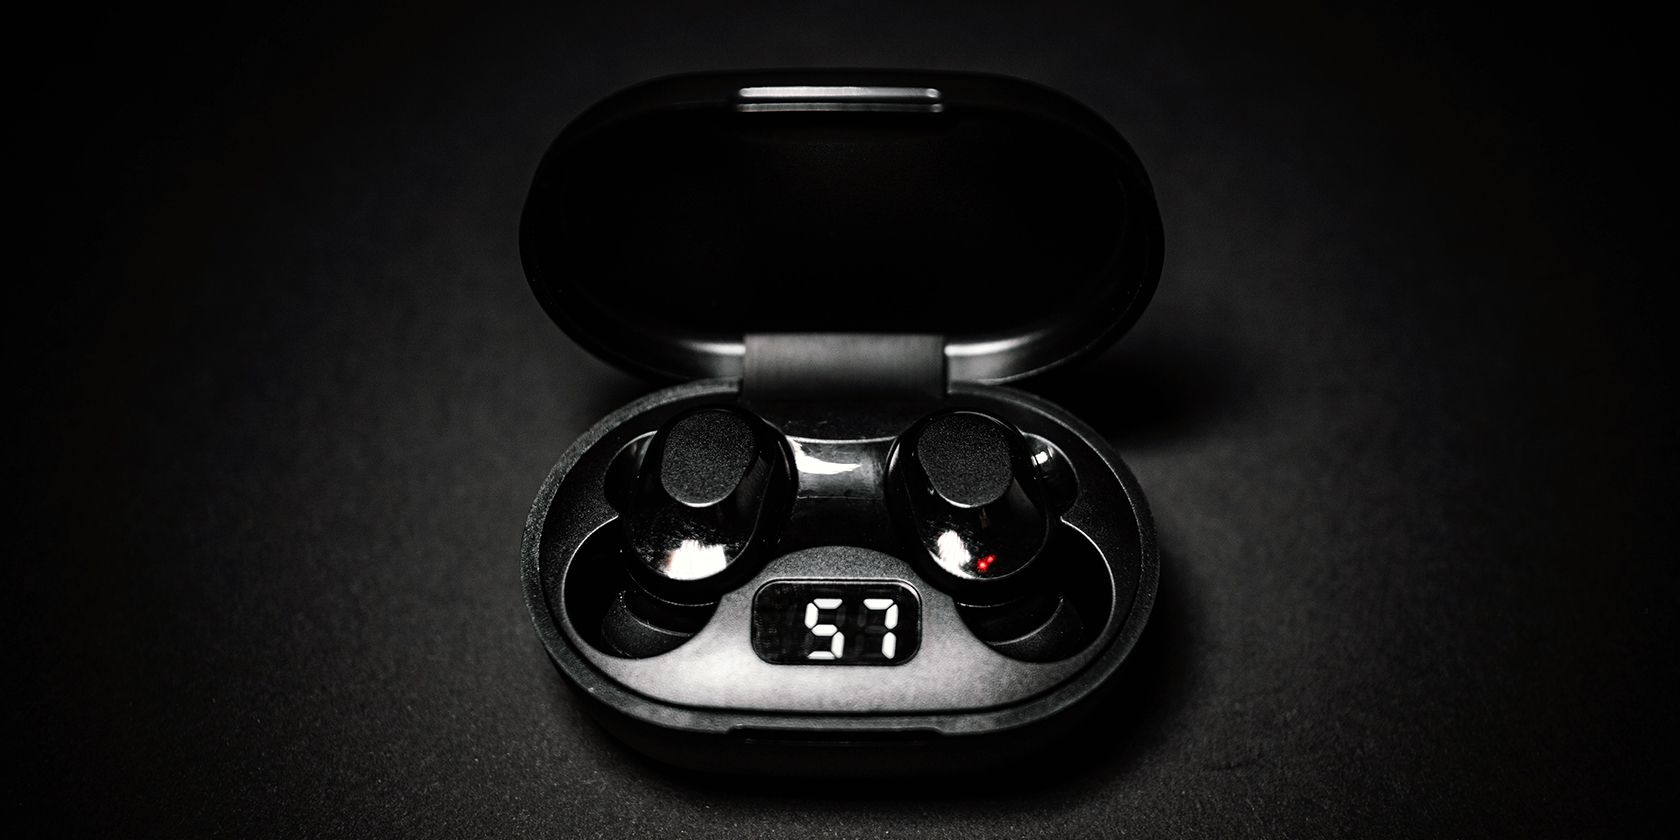 True Wireless Earbuds With Battery Percentage Remaining